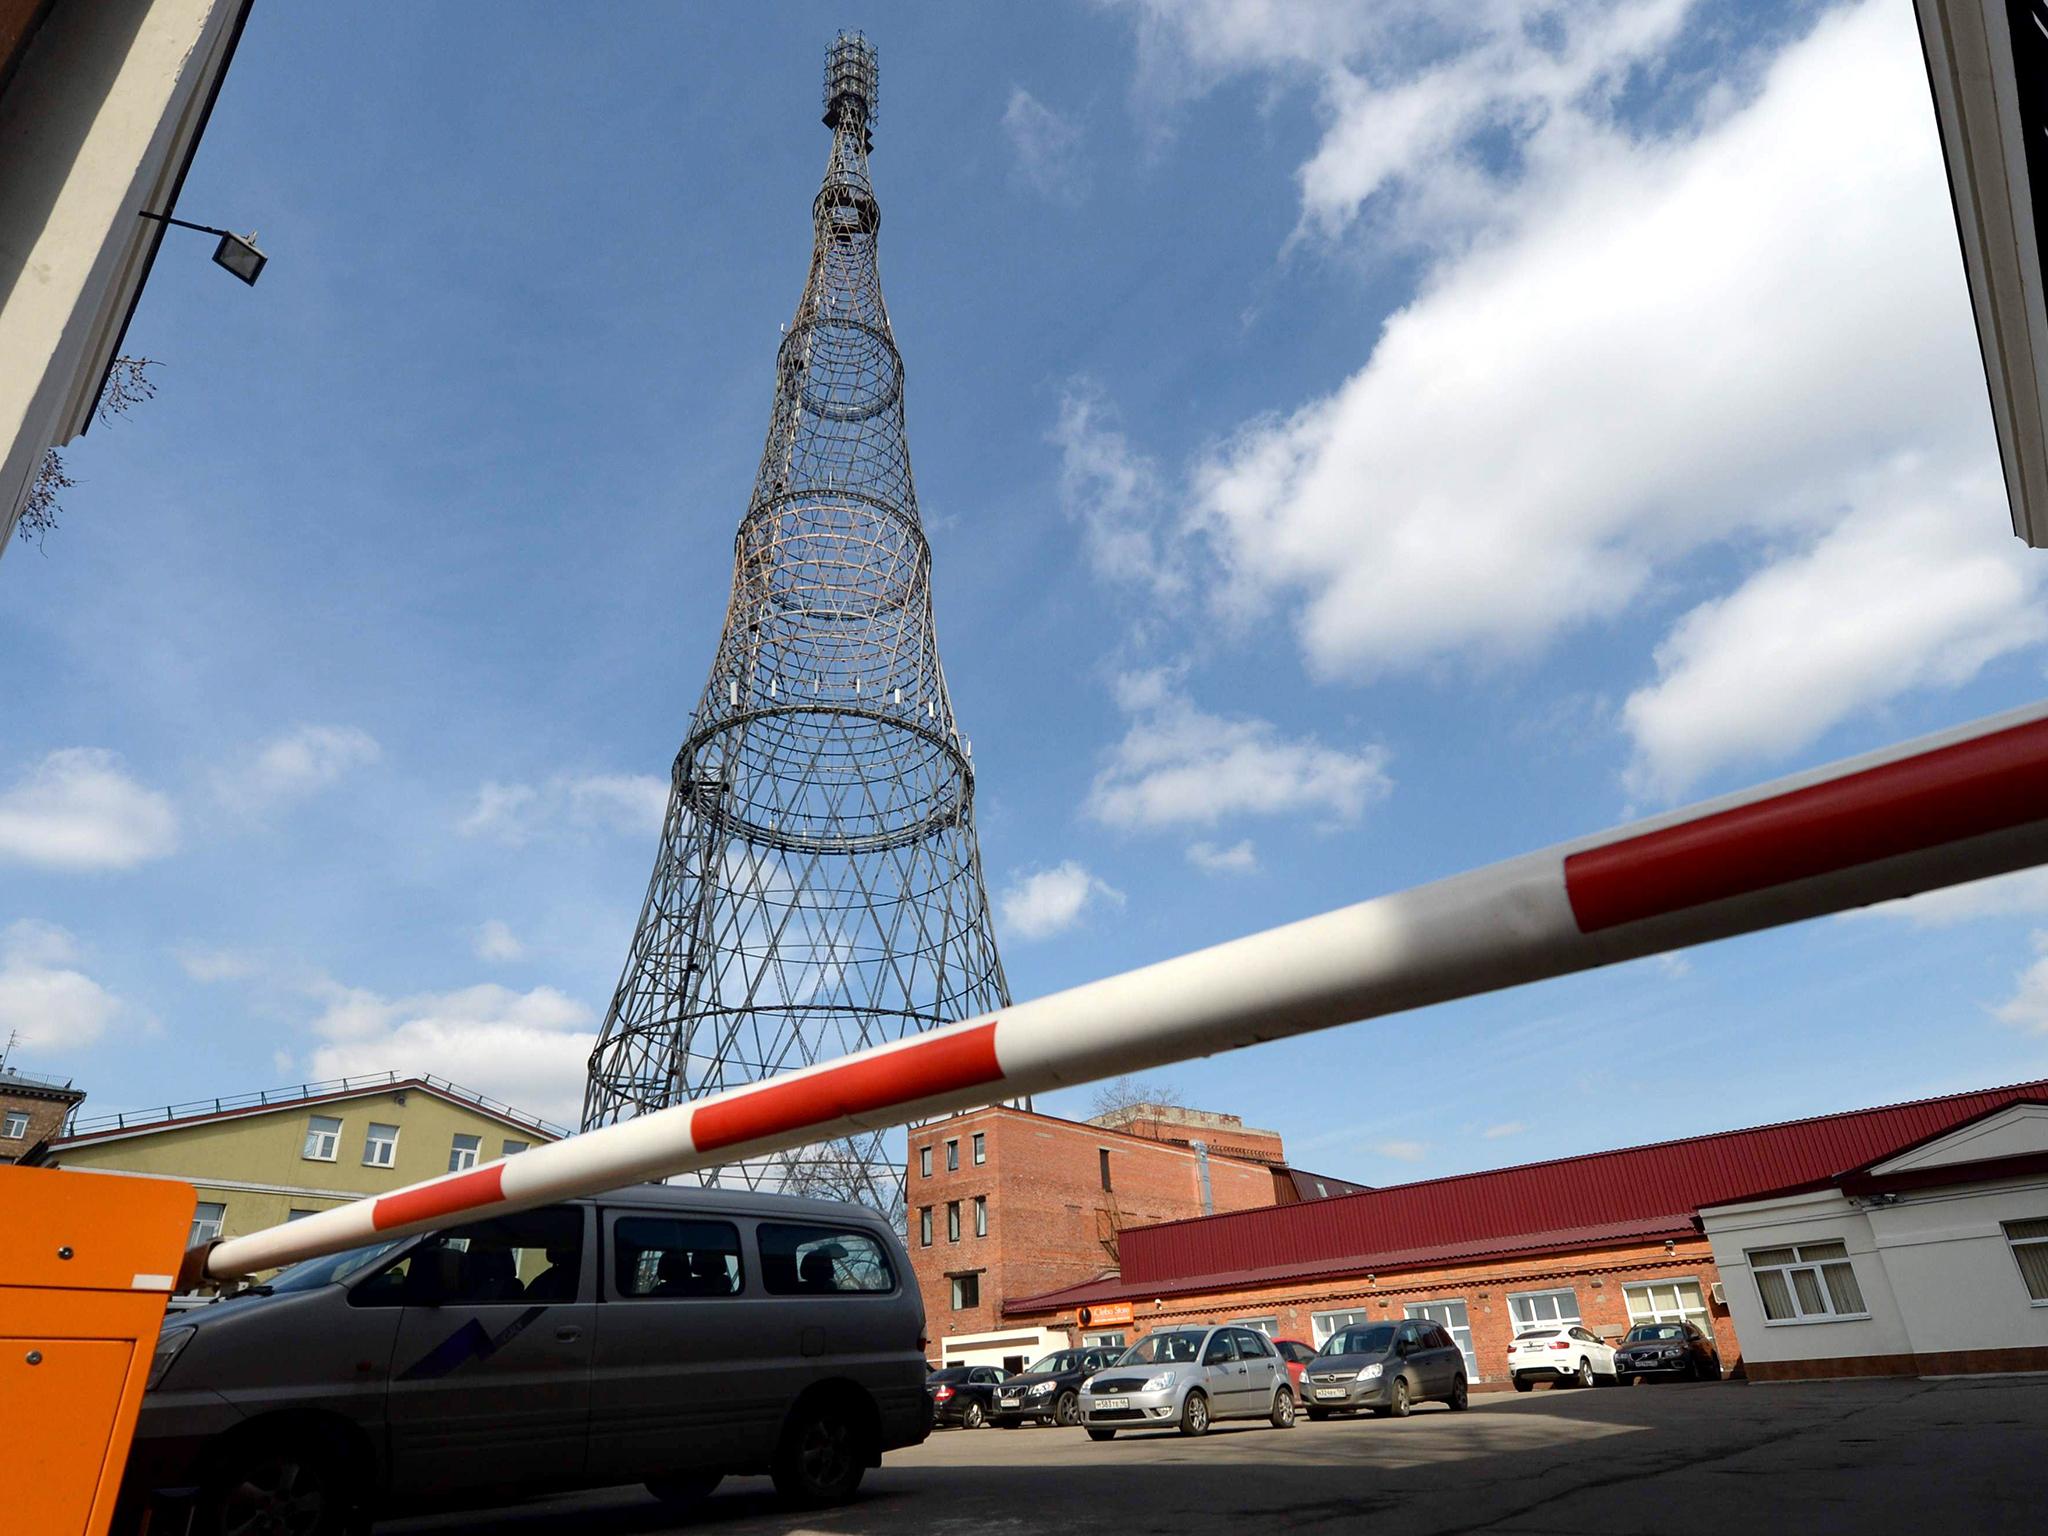 Shukhov Tower, Moscow, on the World Monuments Fund “watch list” of endangered buildings